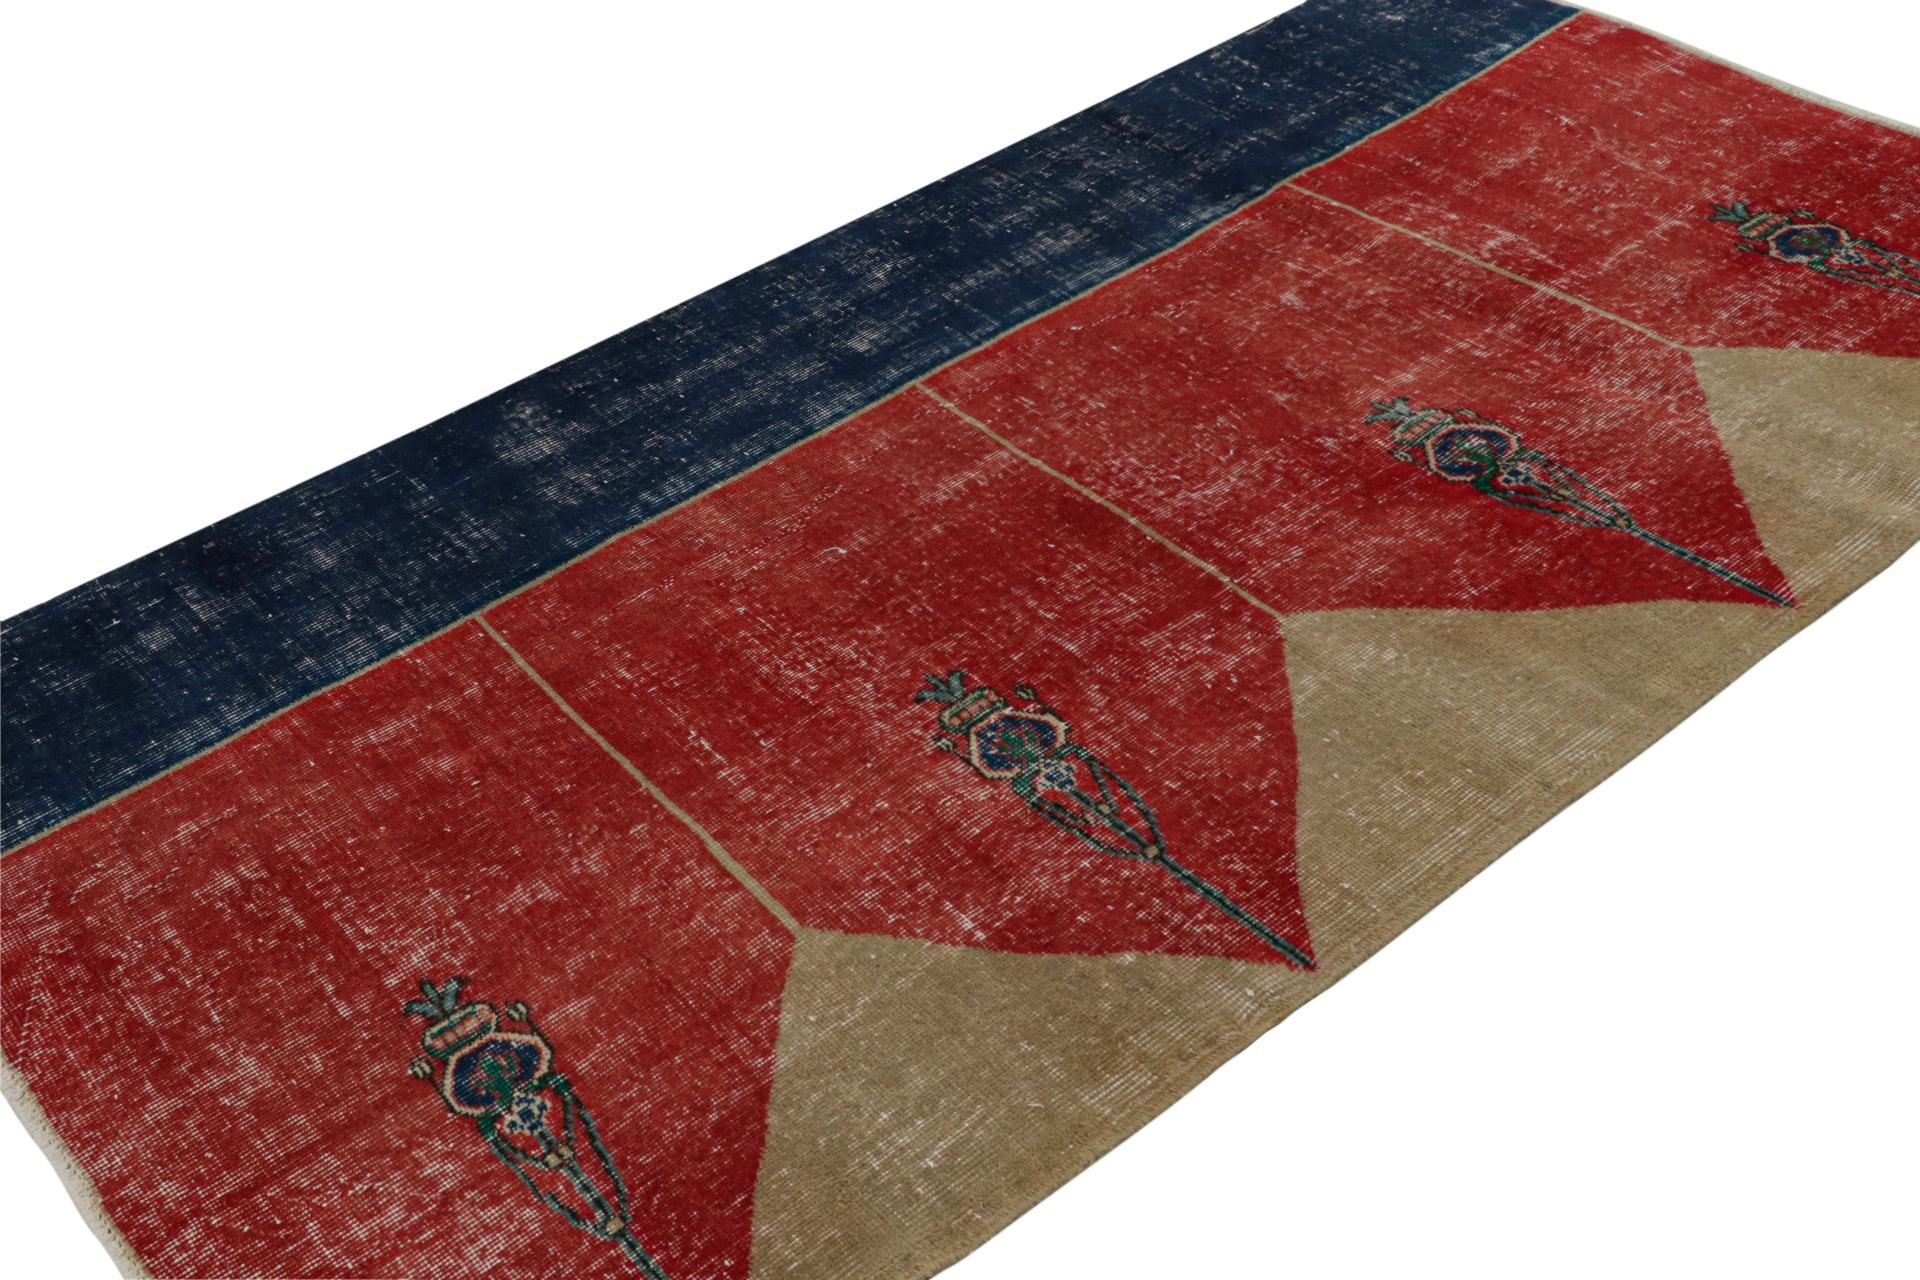 Hand Knotted in wool, this distressed vintage 4x8 Turkish rug, which is inspired by Saf rugs, a particular kind of prayer rug, features a red field and geometric patterns in hues of bronze and navy blue.  

On the Design: 

Connoisseurs will admire